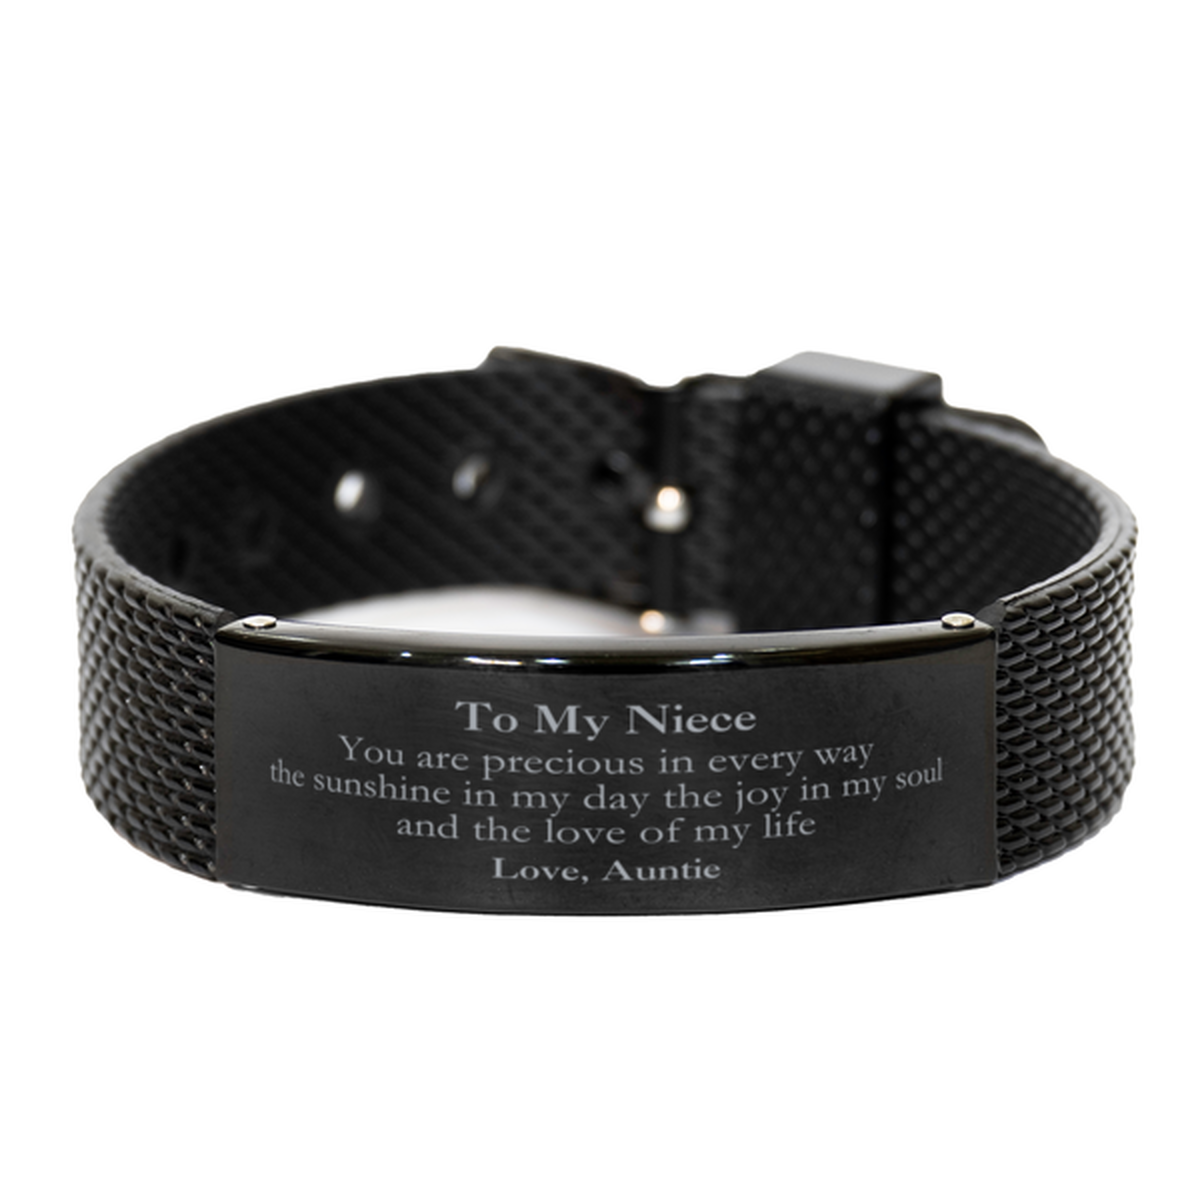 Graduation Gifts for Niece Black Shark Mesh Bracelet Present from Auntie, Christmas Niece Birthday Gifts Niece You are precious in every way the sunshine in my day. Love, Auntie